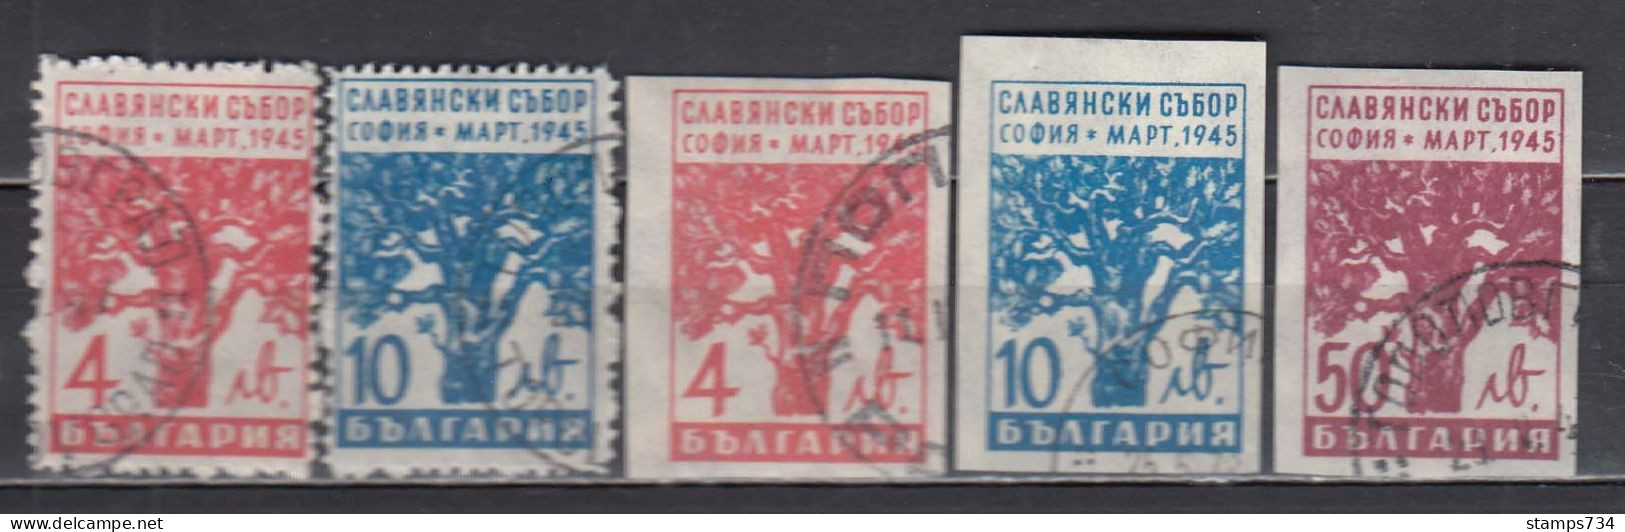 Bulgaria 1945 - Slavic Congress,  5v. - Perf.+imperforated, Used - Used Stamps